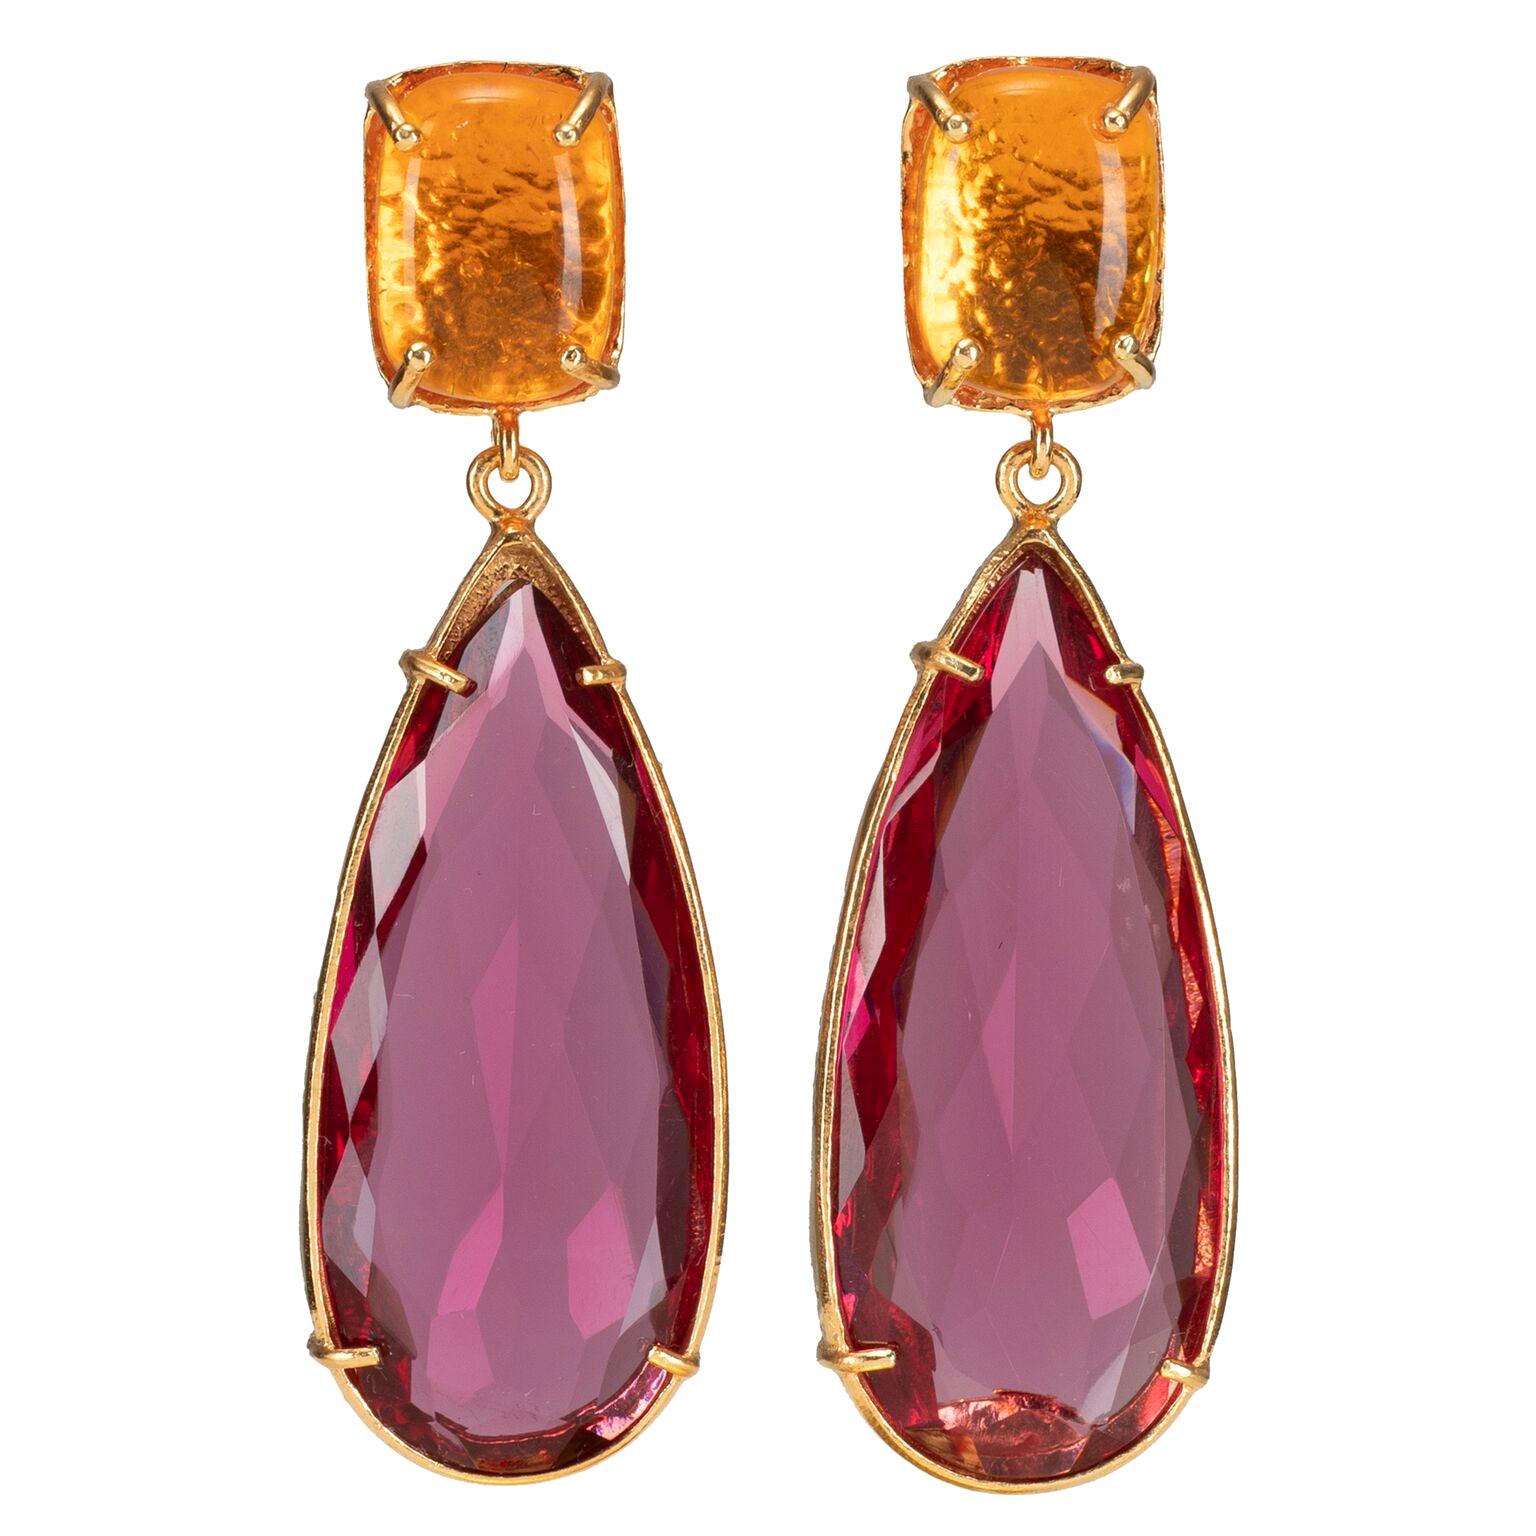 Christie Nicolaides Gold Franca Earrings in Pink Quartz & Amber  For Sale